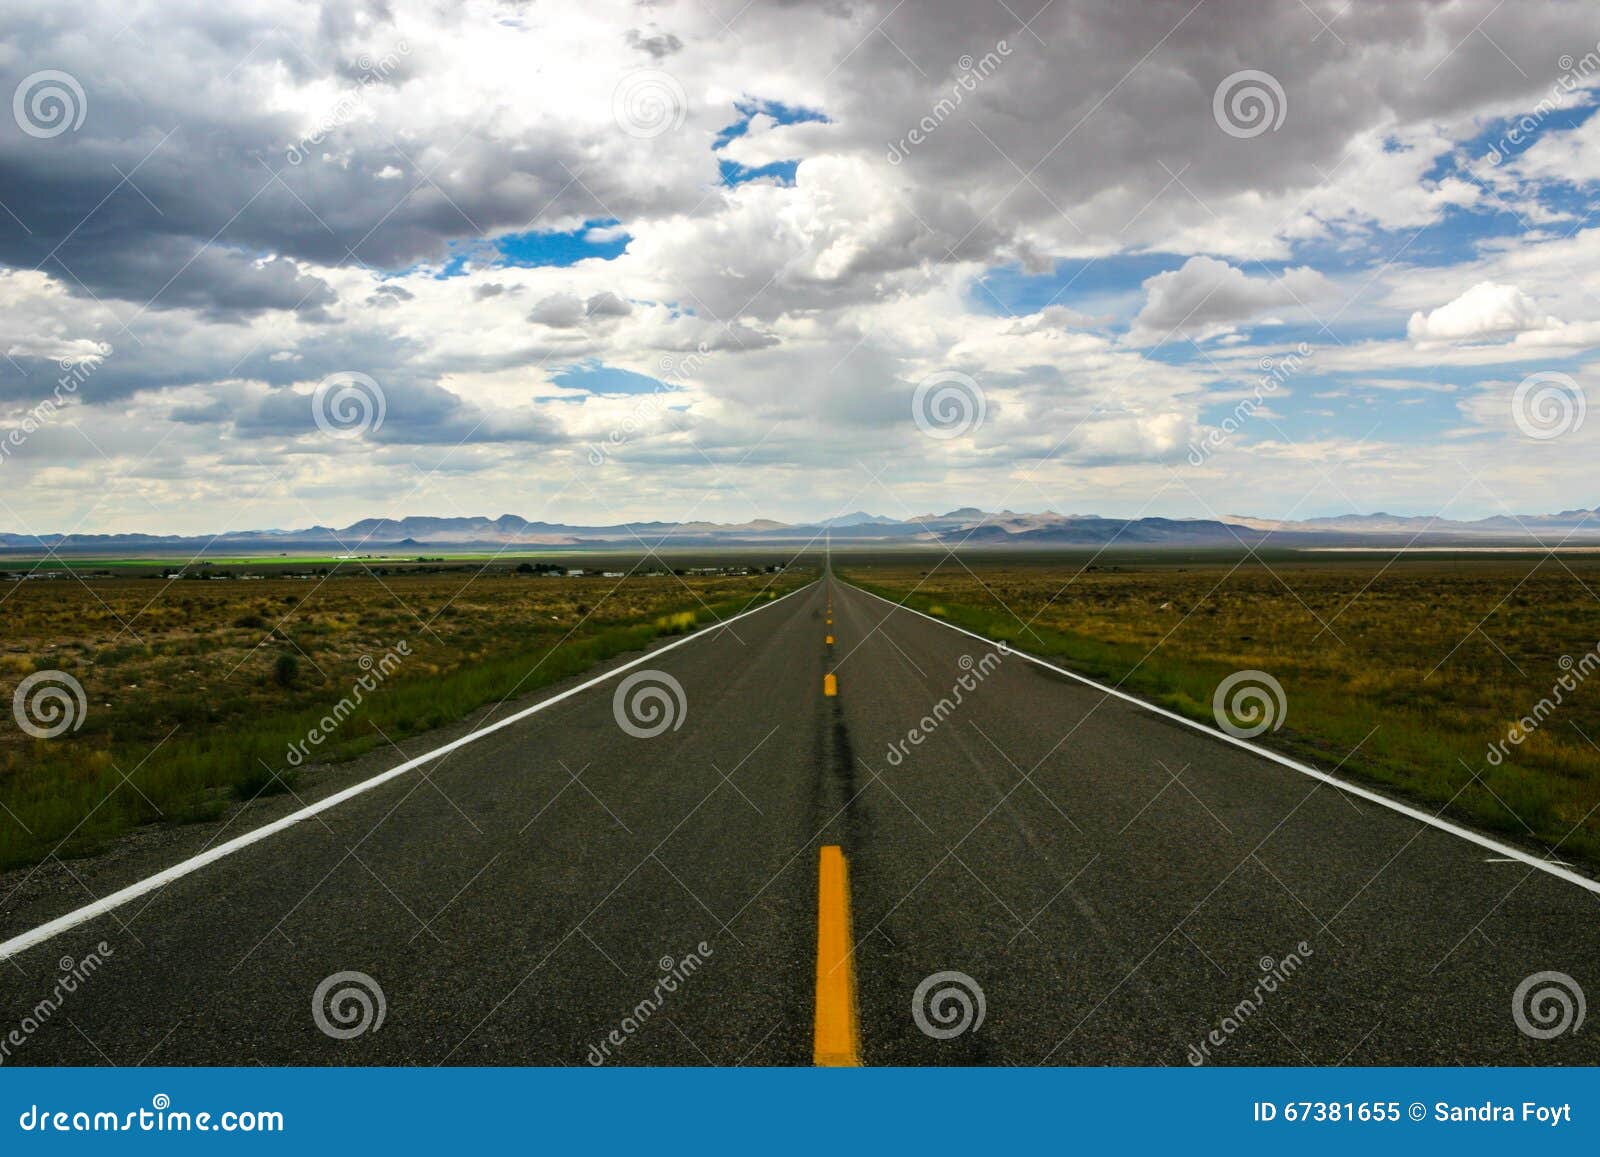 extraterrestrial highway - state route 375